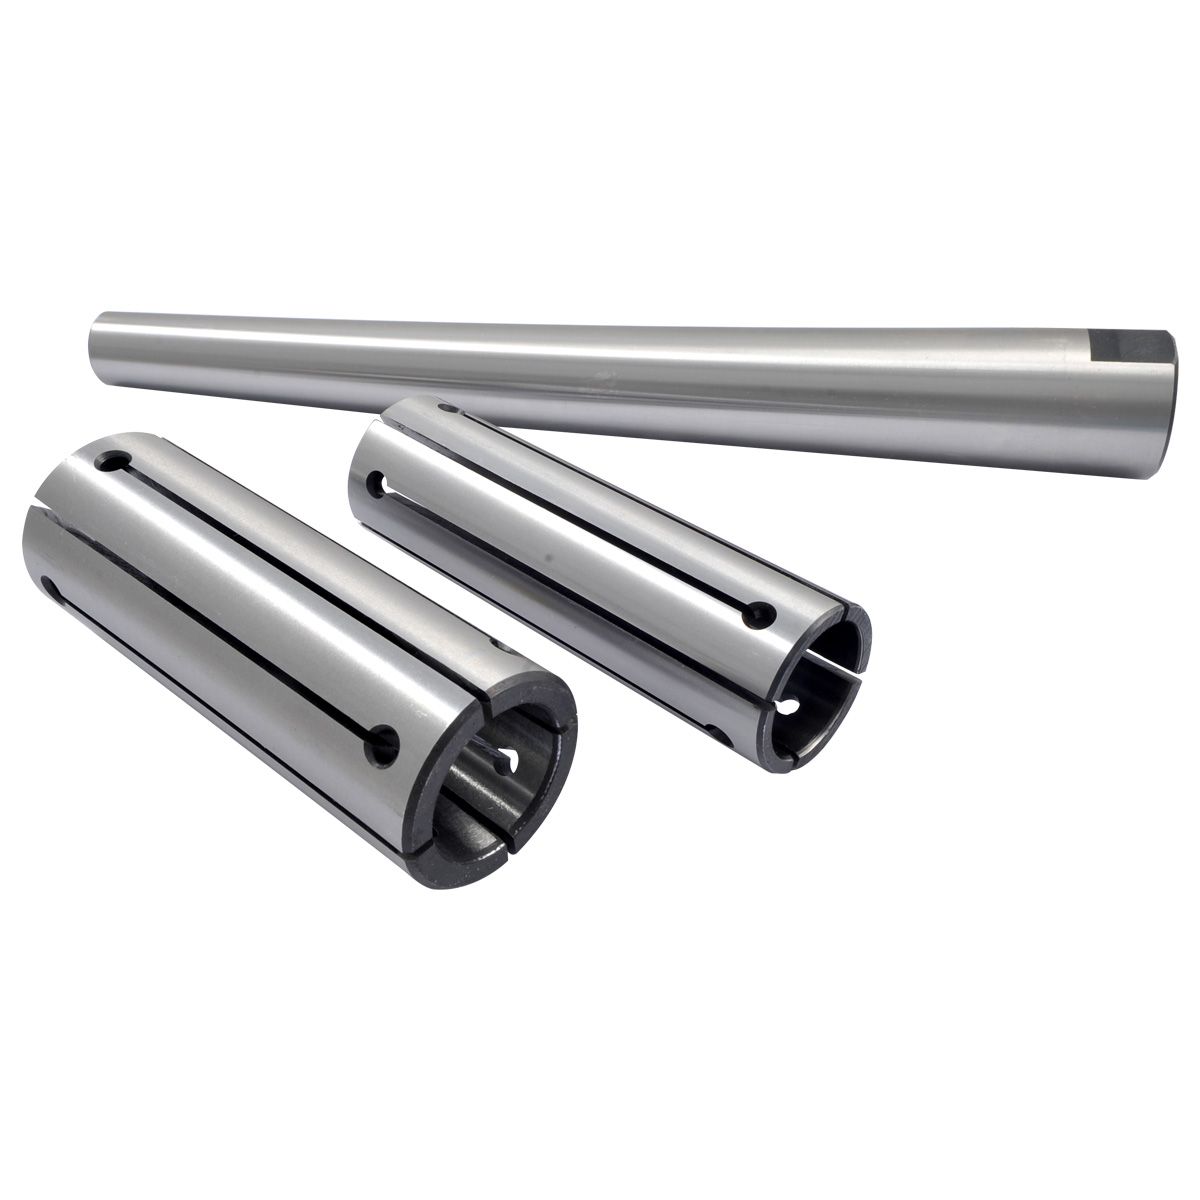 1-1/2-2" WITH 11-1/2" ARBOR AND 5" SLEEVE EXPANDING MANDREL SET (3902-3064)